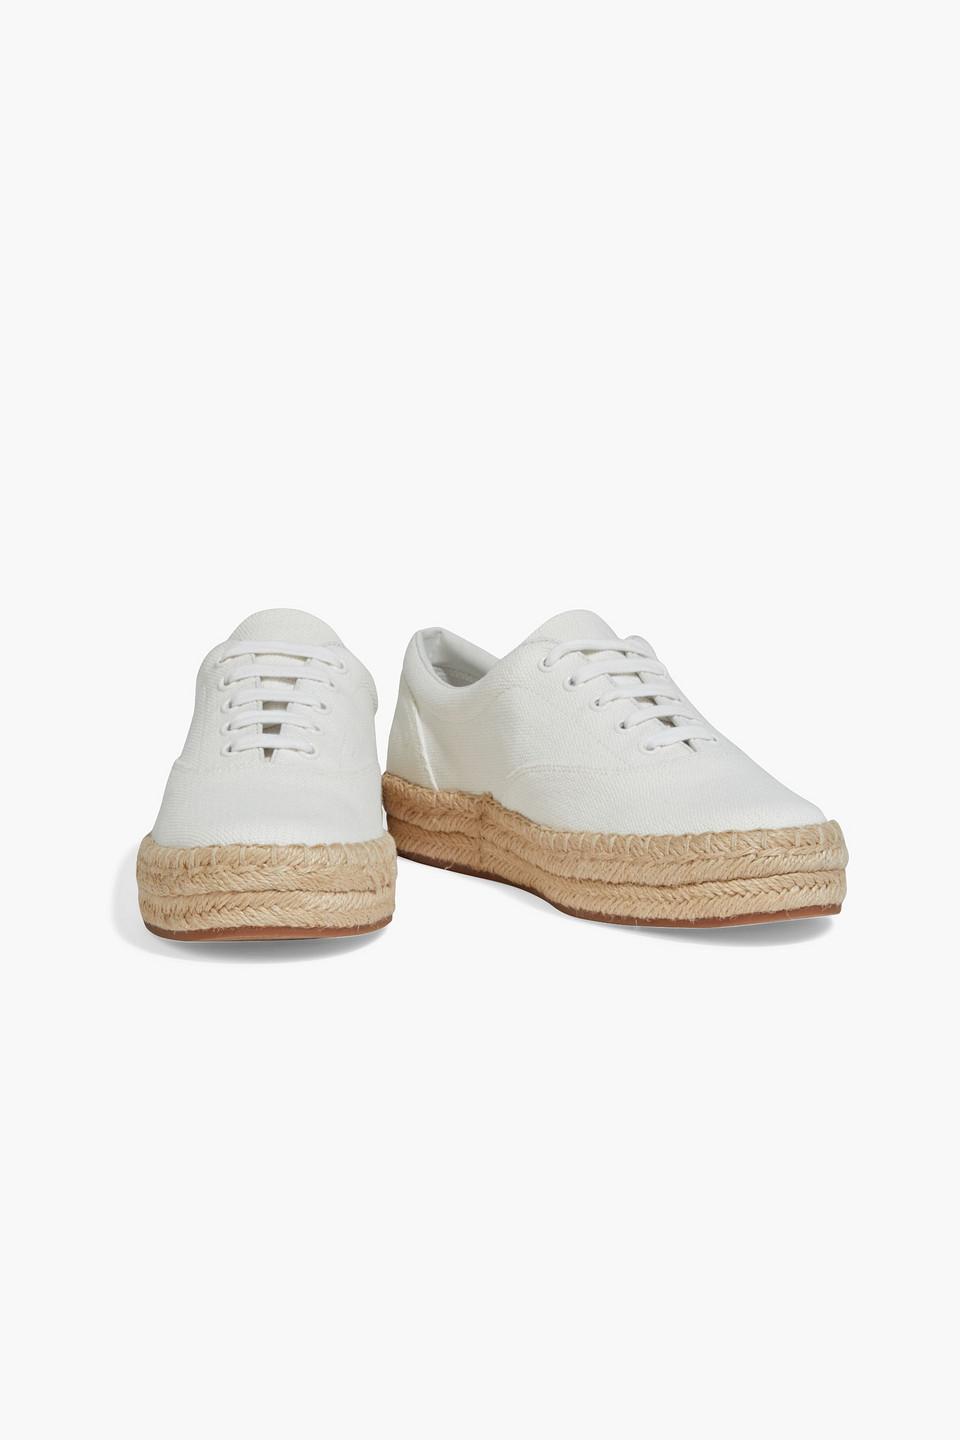 Vince Ursa Canvas Espadrille Sneakers in White | Lyst